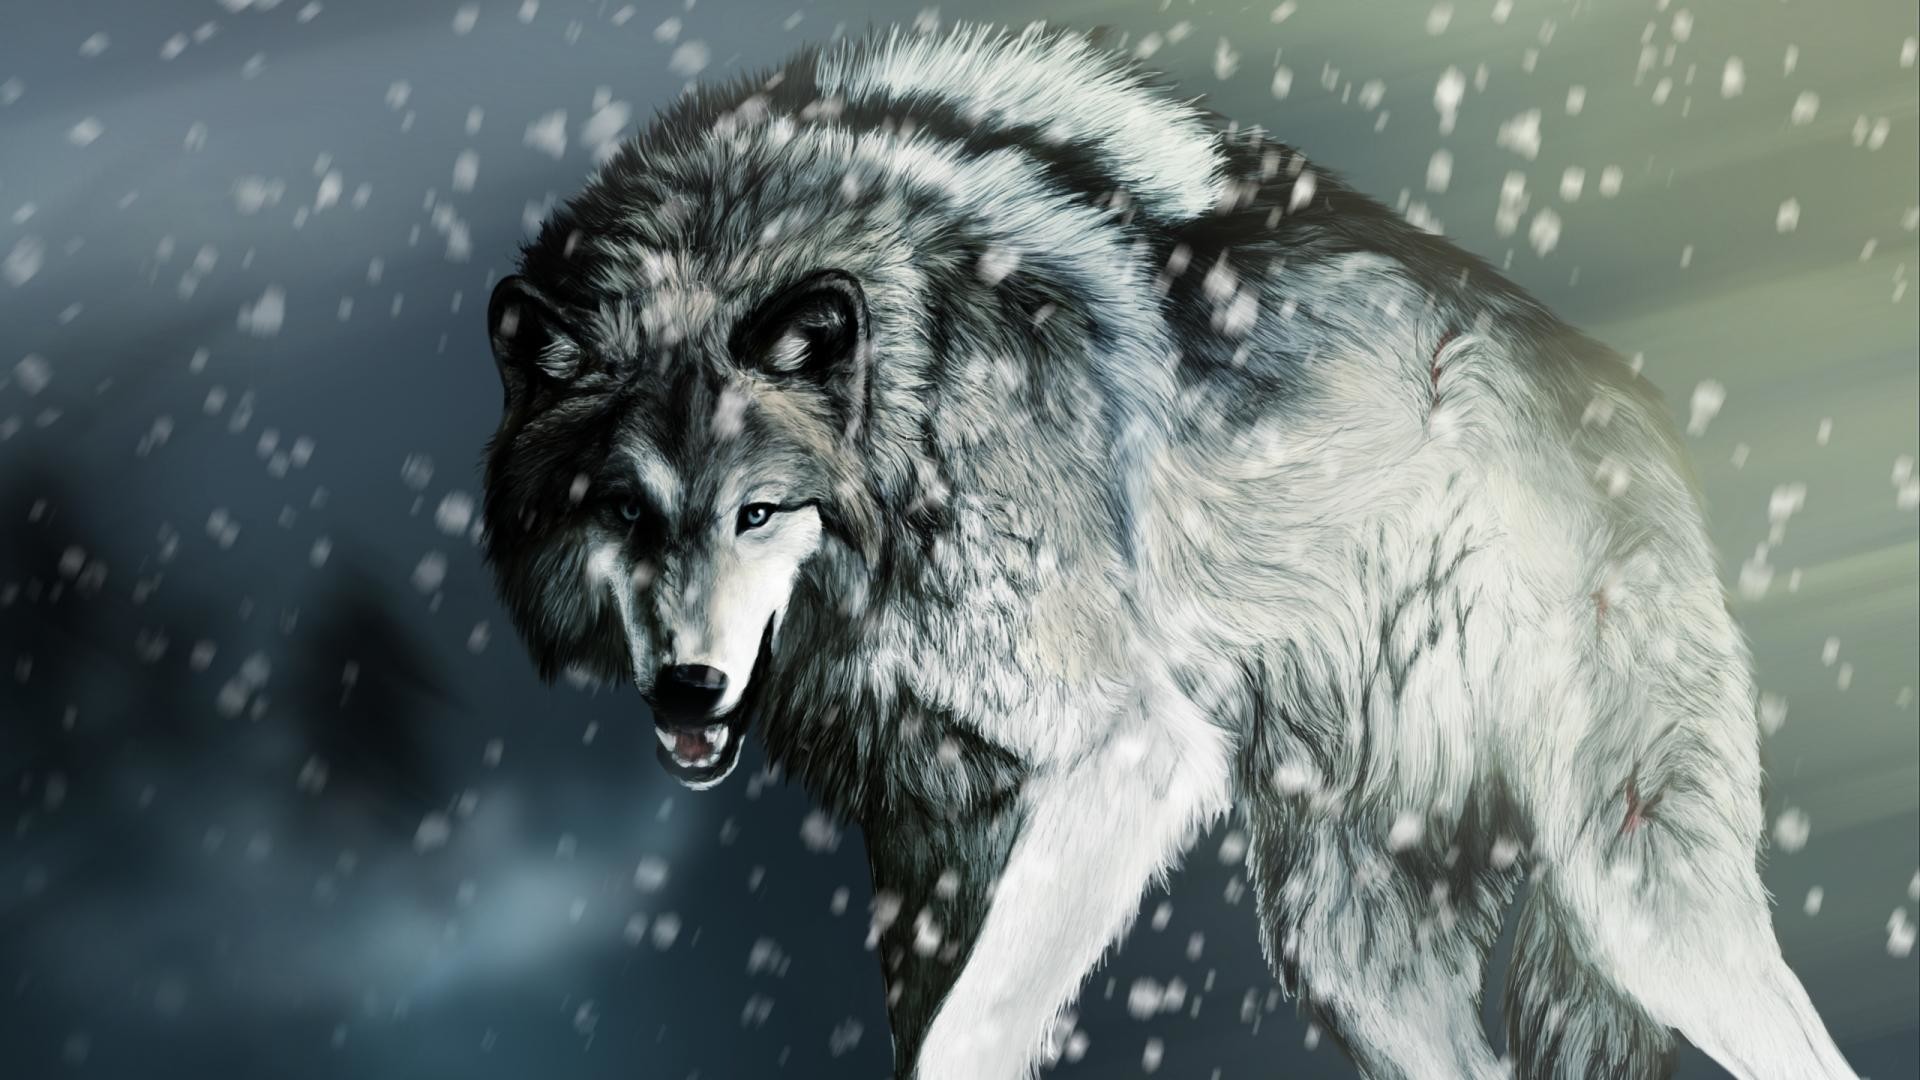 1920x1080 Gray Wolf Wallpaper | Gray Wolf Images Free | Cool Wallpapers